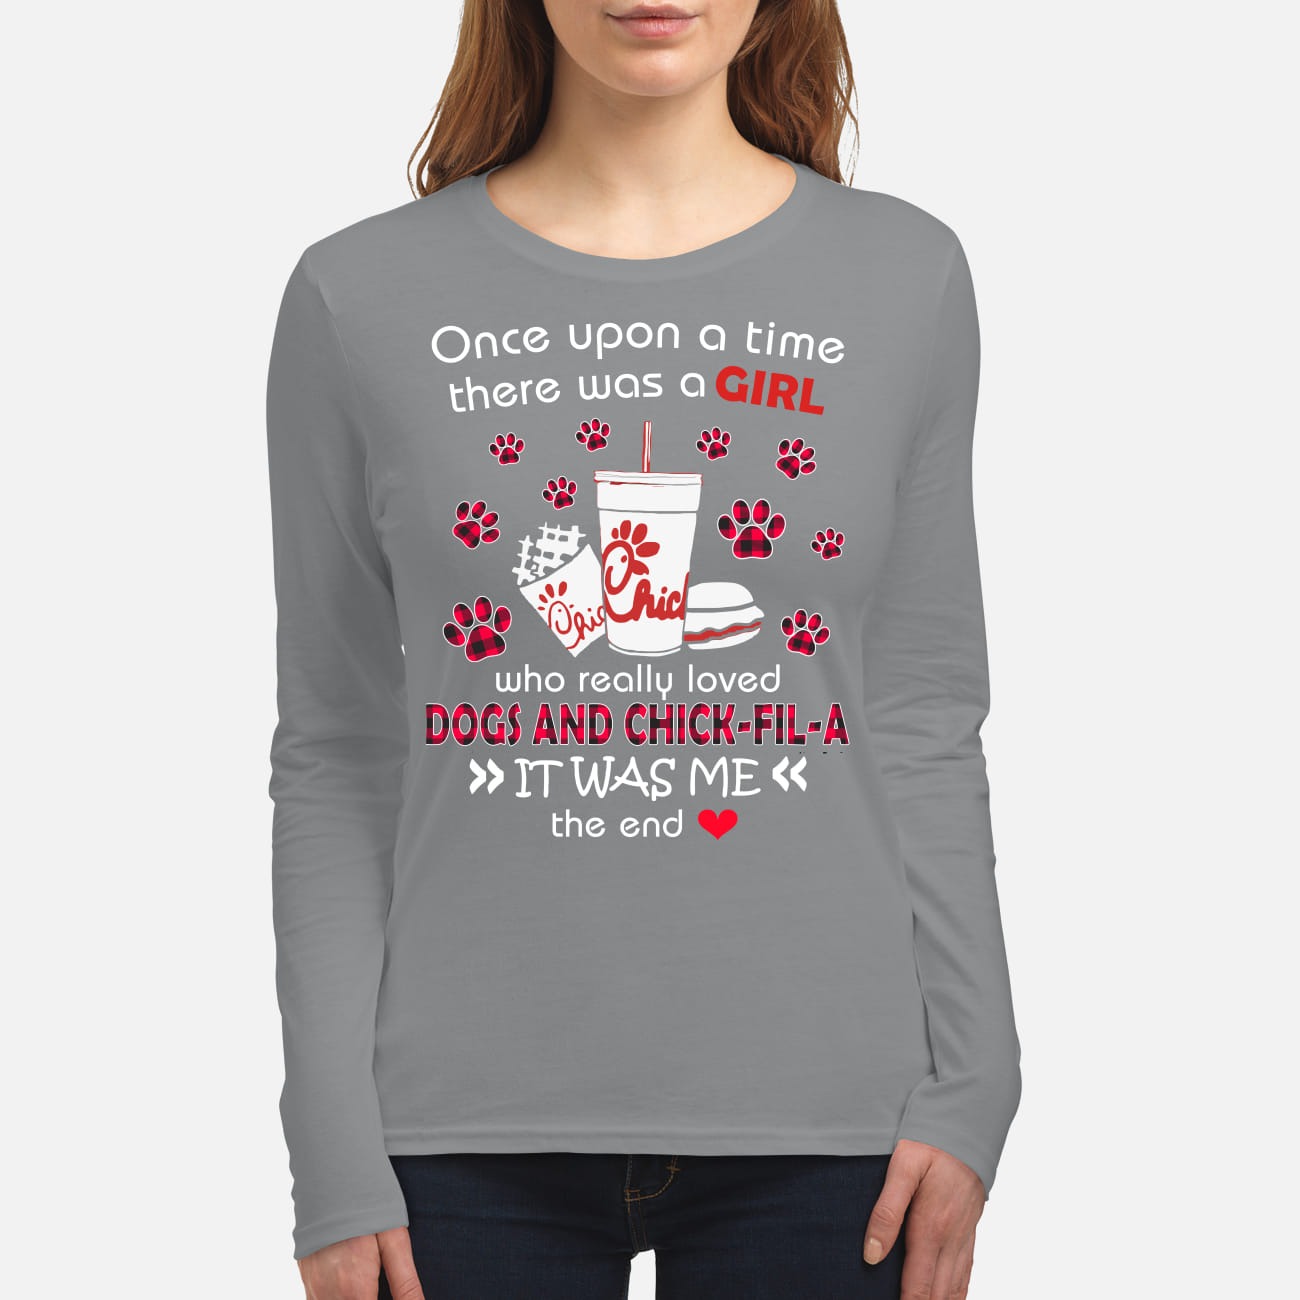 There was a girl who really loved dogs and chick fil a women's long sleeved shirt